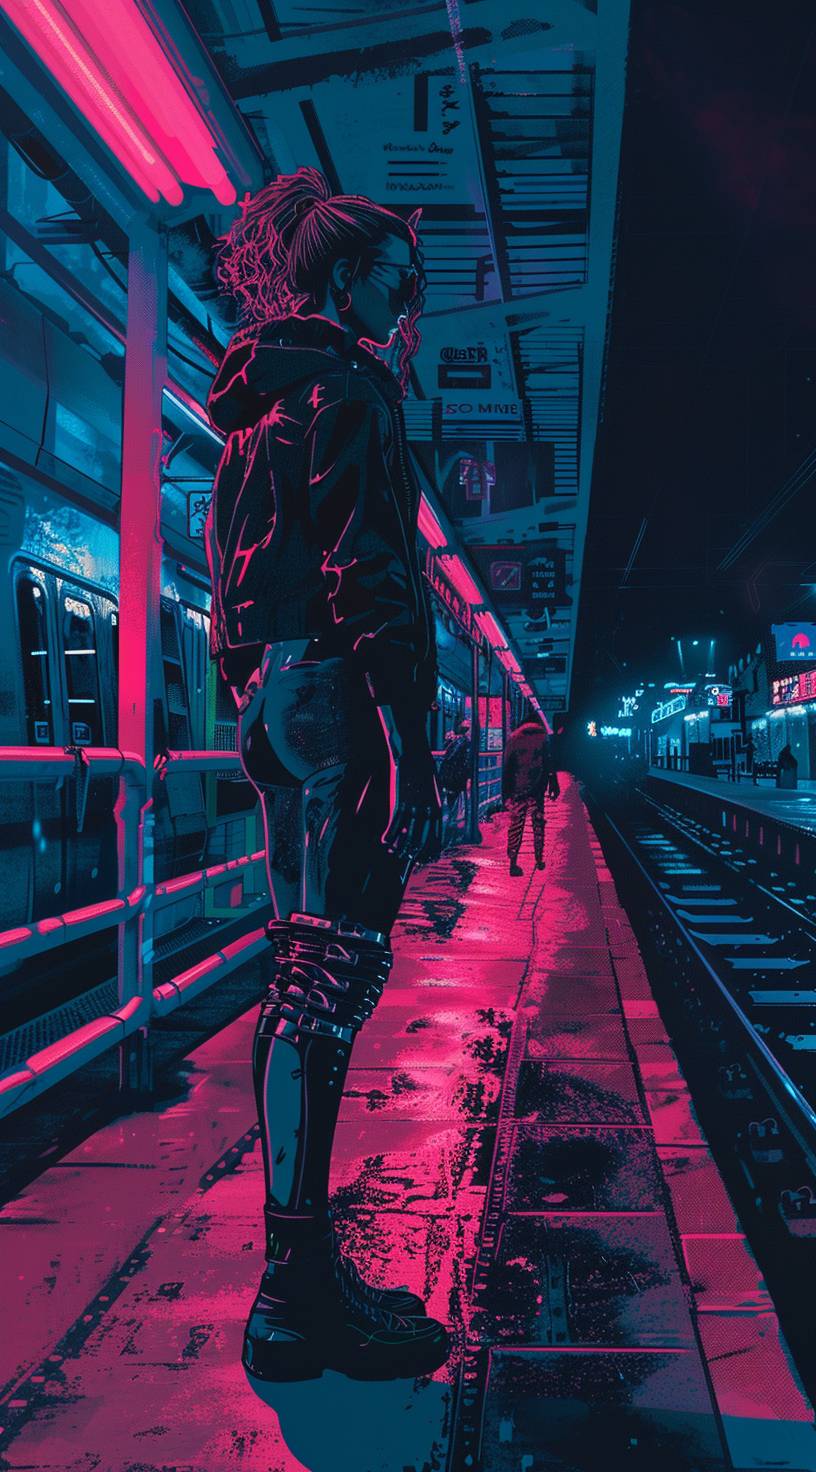 A lady in a colorful outfit reminiscent of cyberpunk manga, josan gonzalez's style, standing in the gangway. The outfit features sky-blue and pink colors, creating a strong sense of realism. The artwork incorporates the theme of transportcore and includes meticulously crafted blink-and-you-miss-it details. It follows a vaporpunk style. --ar 71:128  --v 6.0